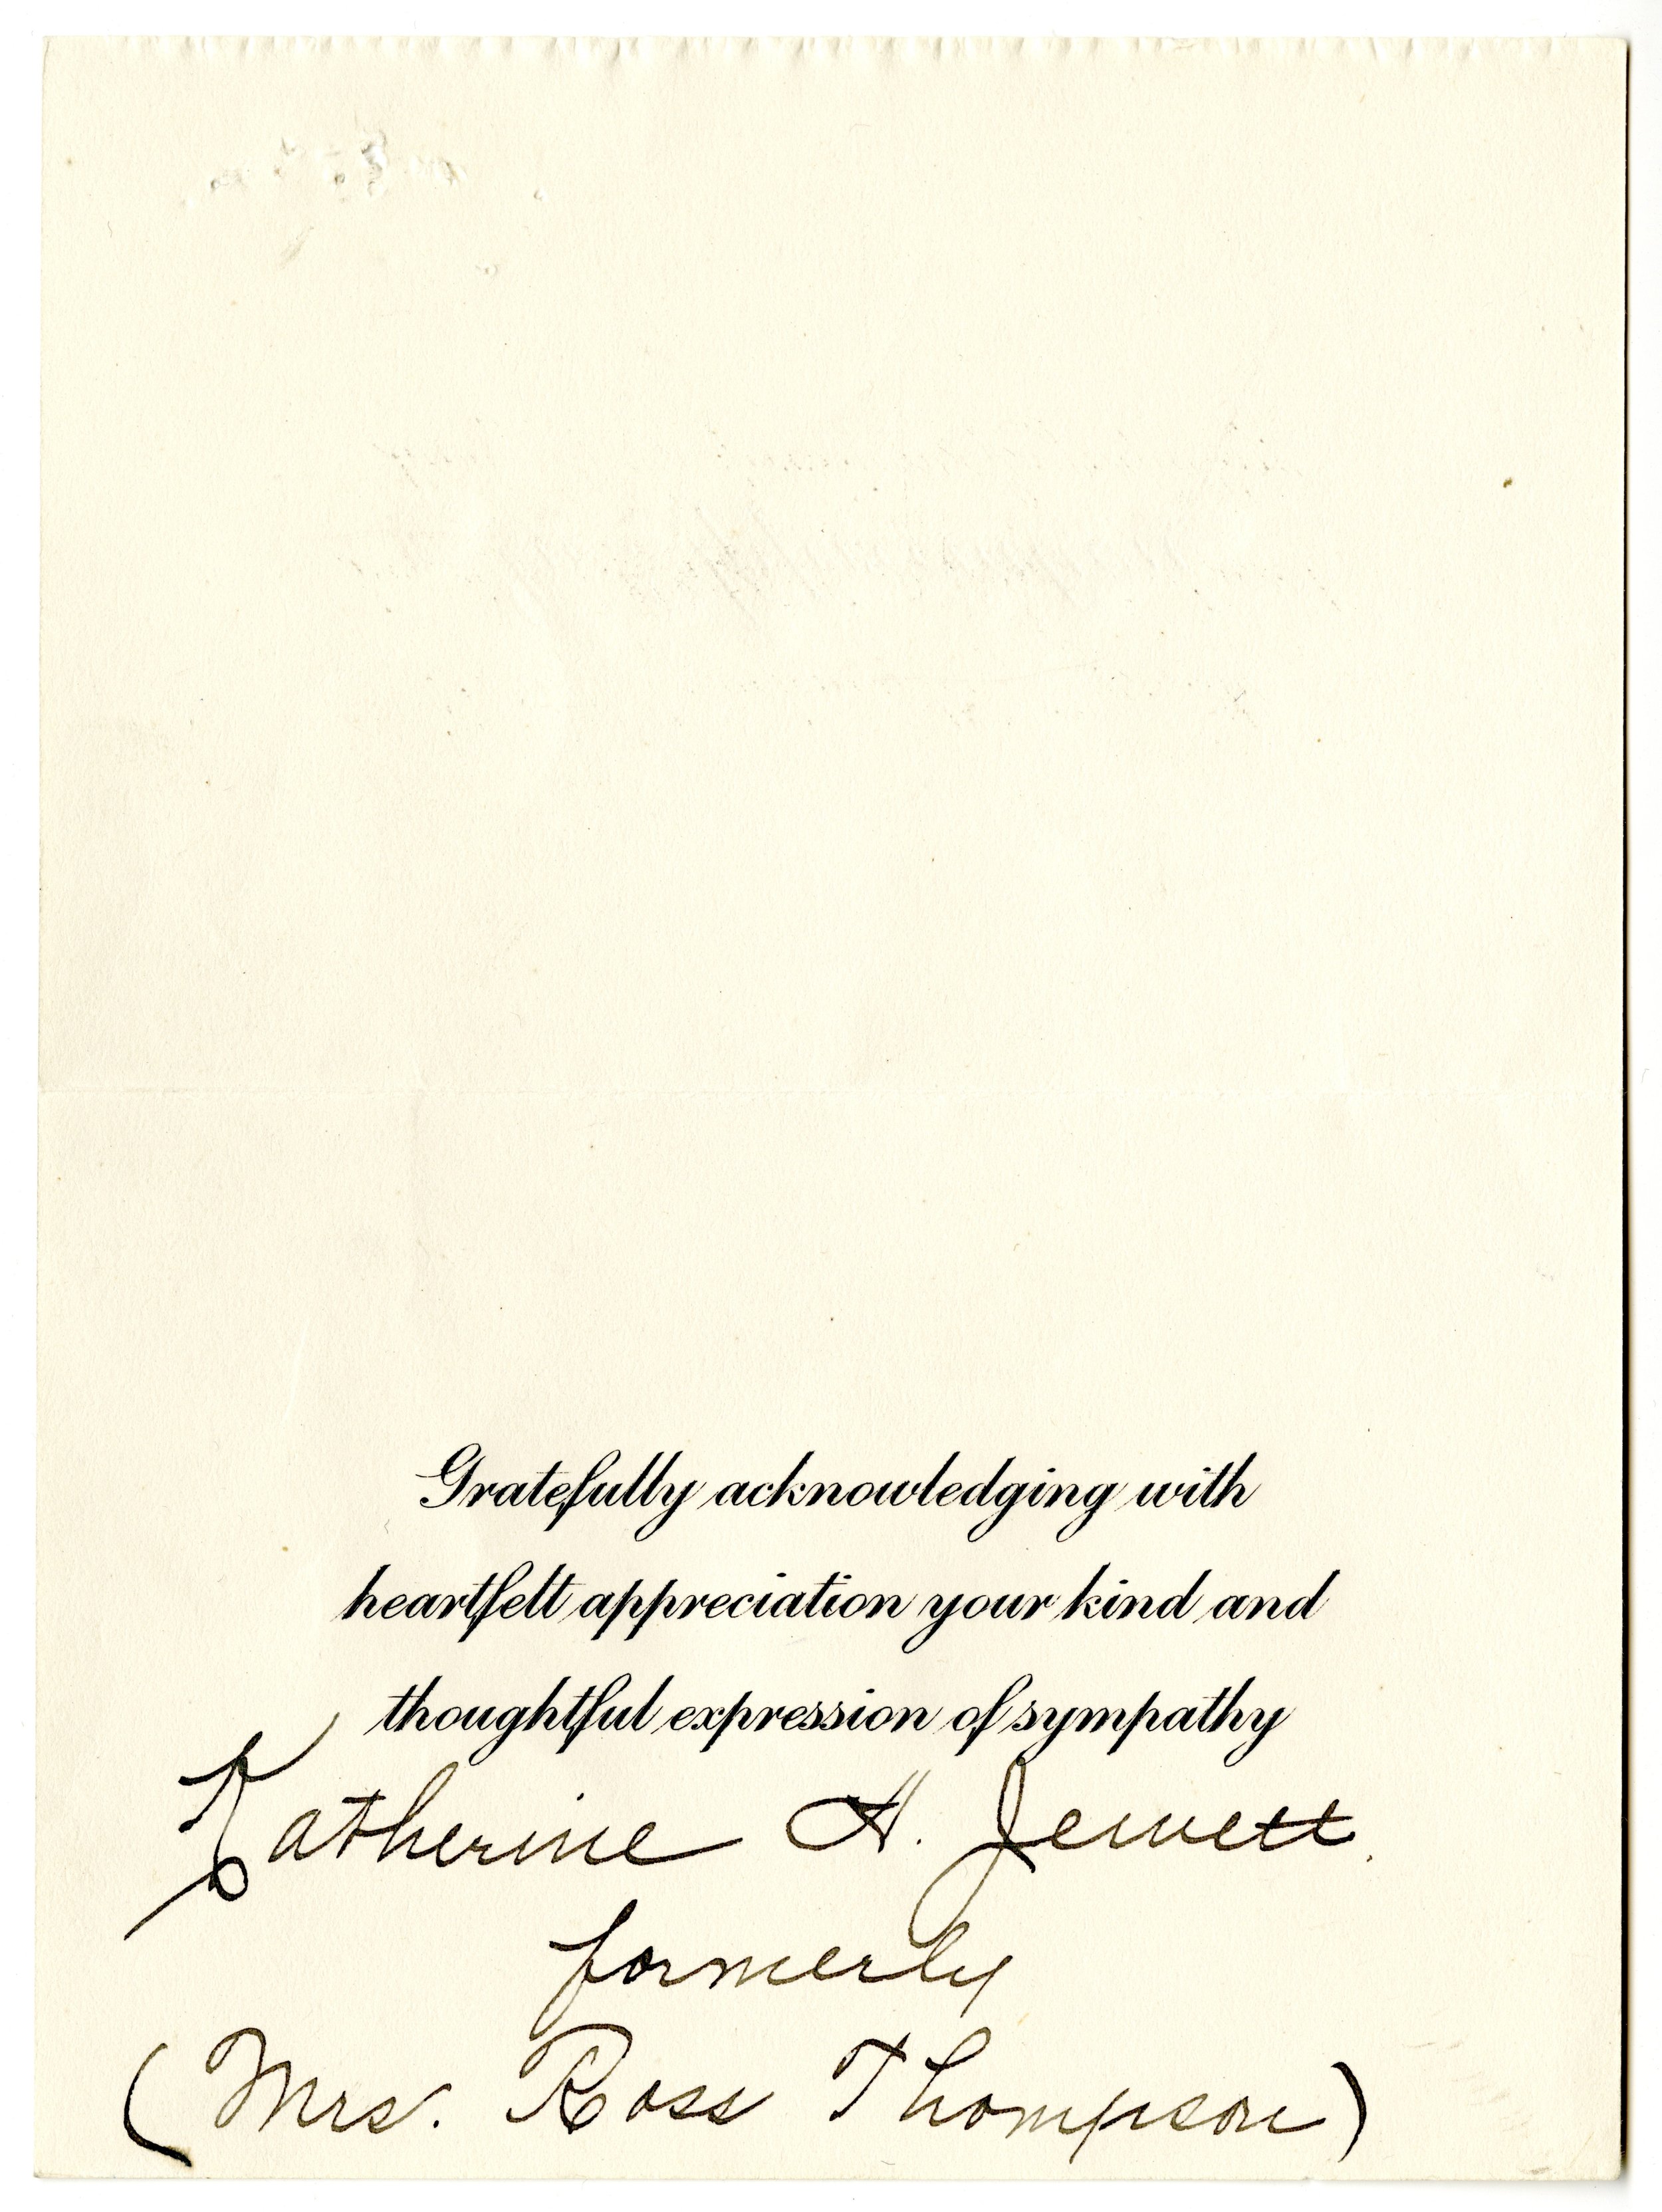 Note from Katherine Thompson to the City of Rossland. Collection of the Rossland Museum and Discovery Centre. March 1951.